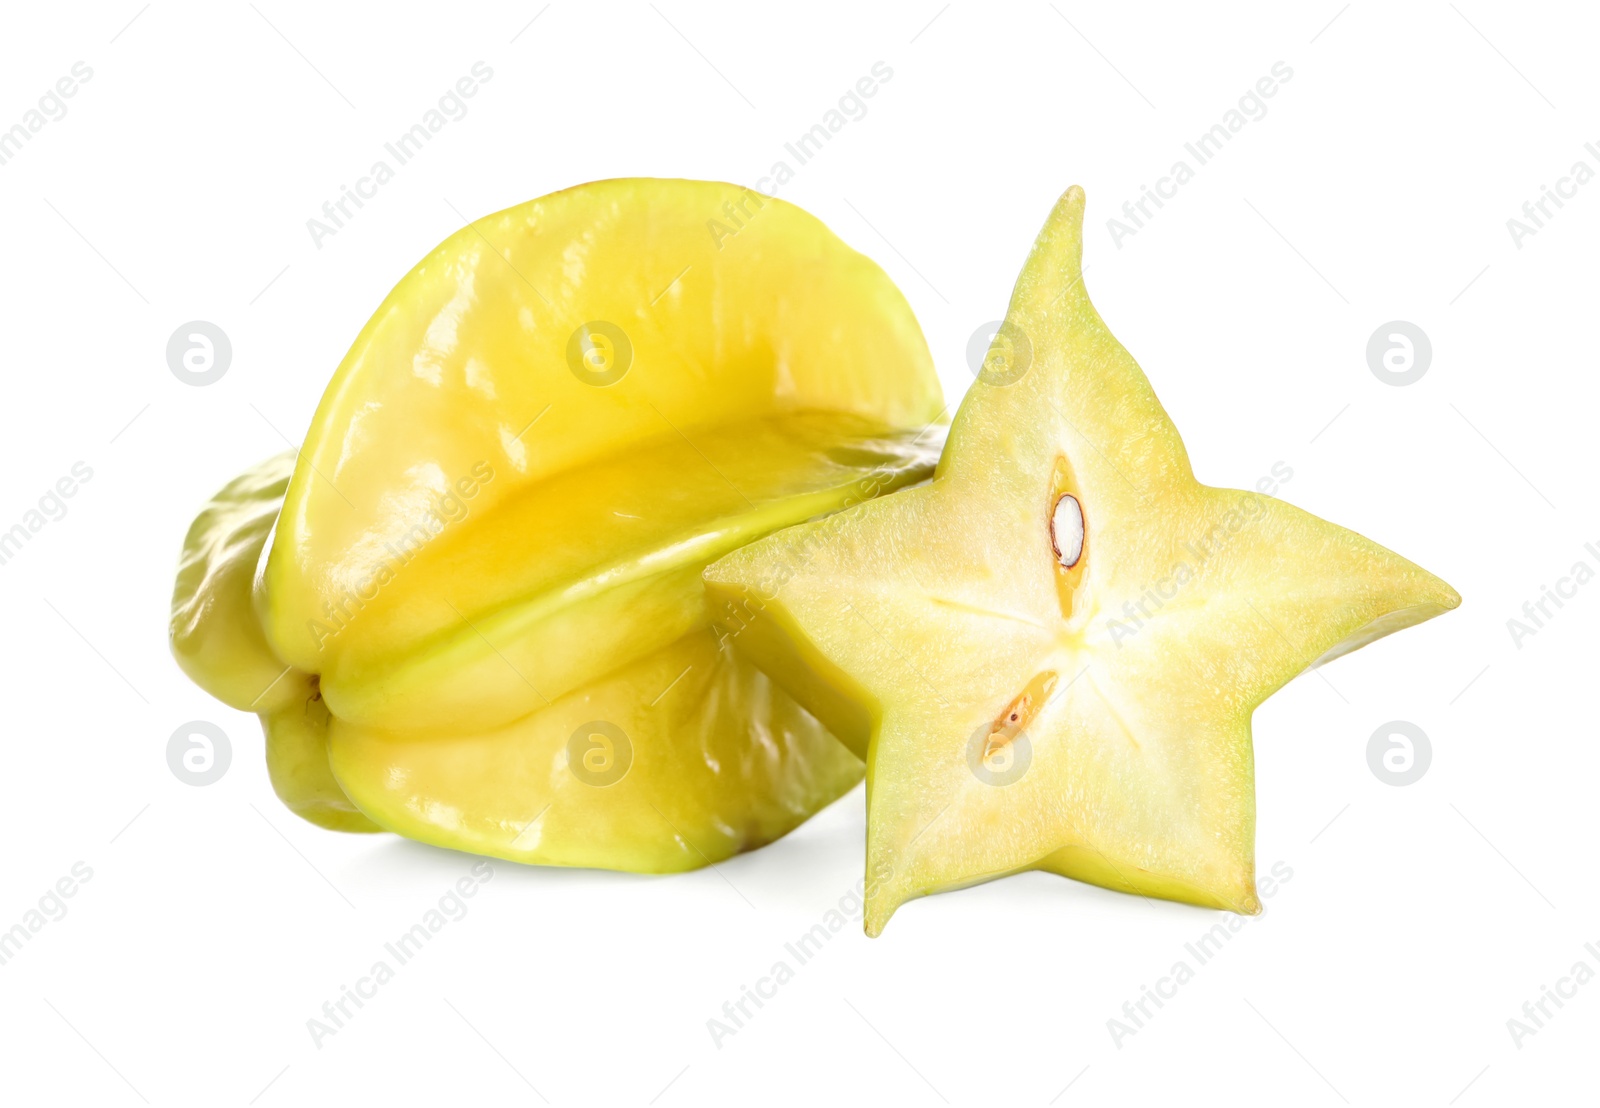 Photo of Cut and whole carambolas on white background